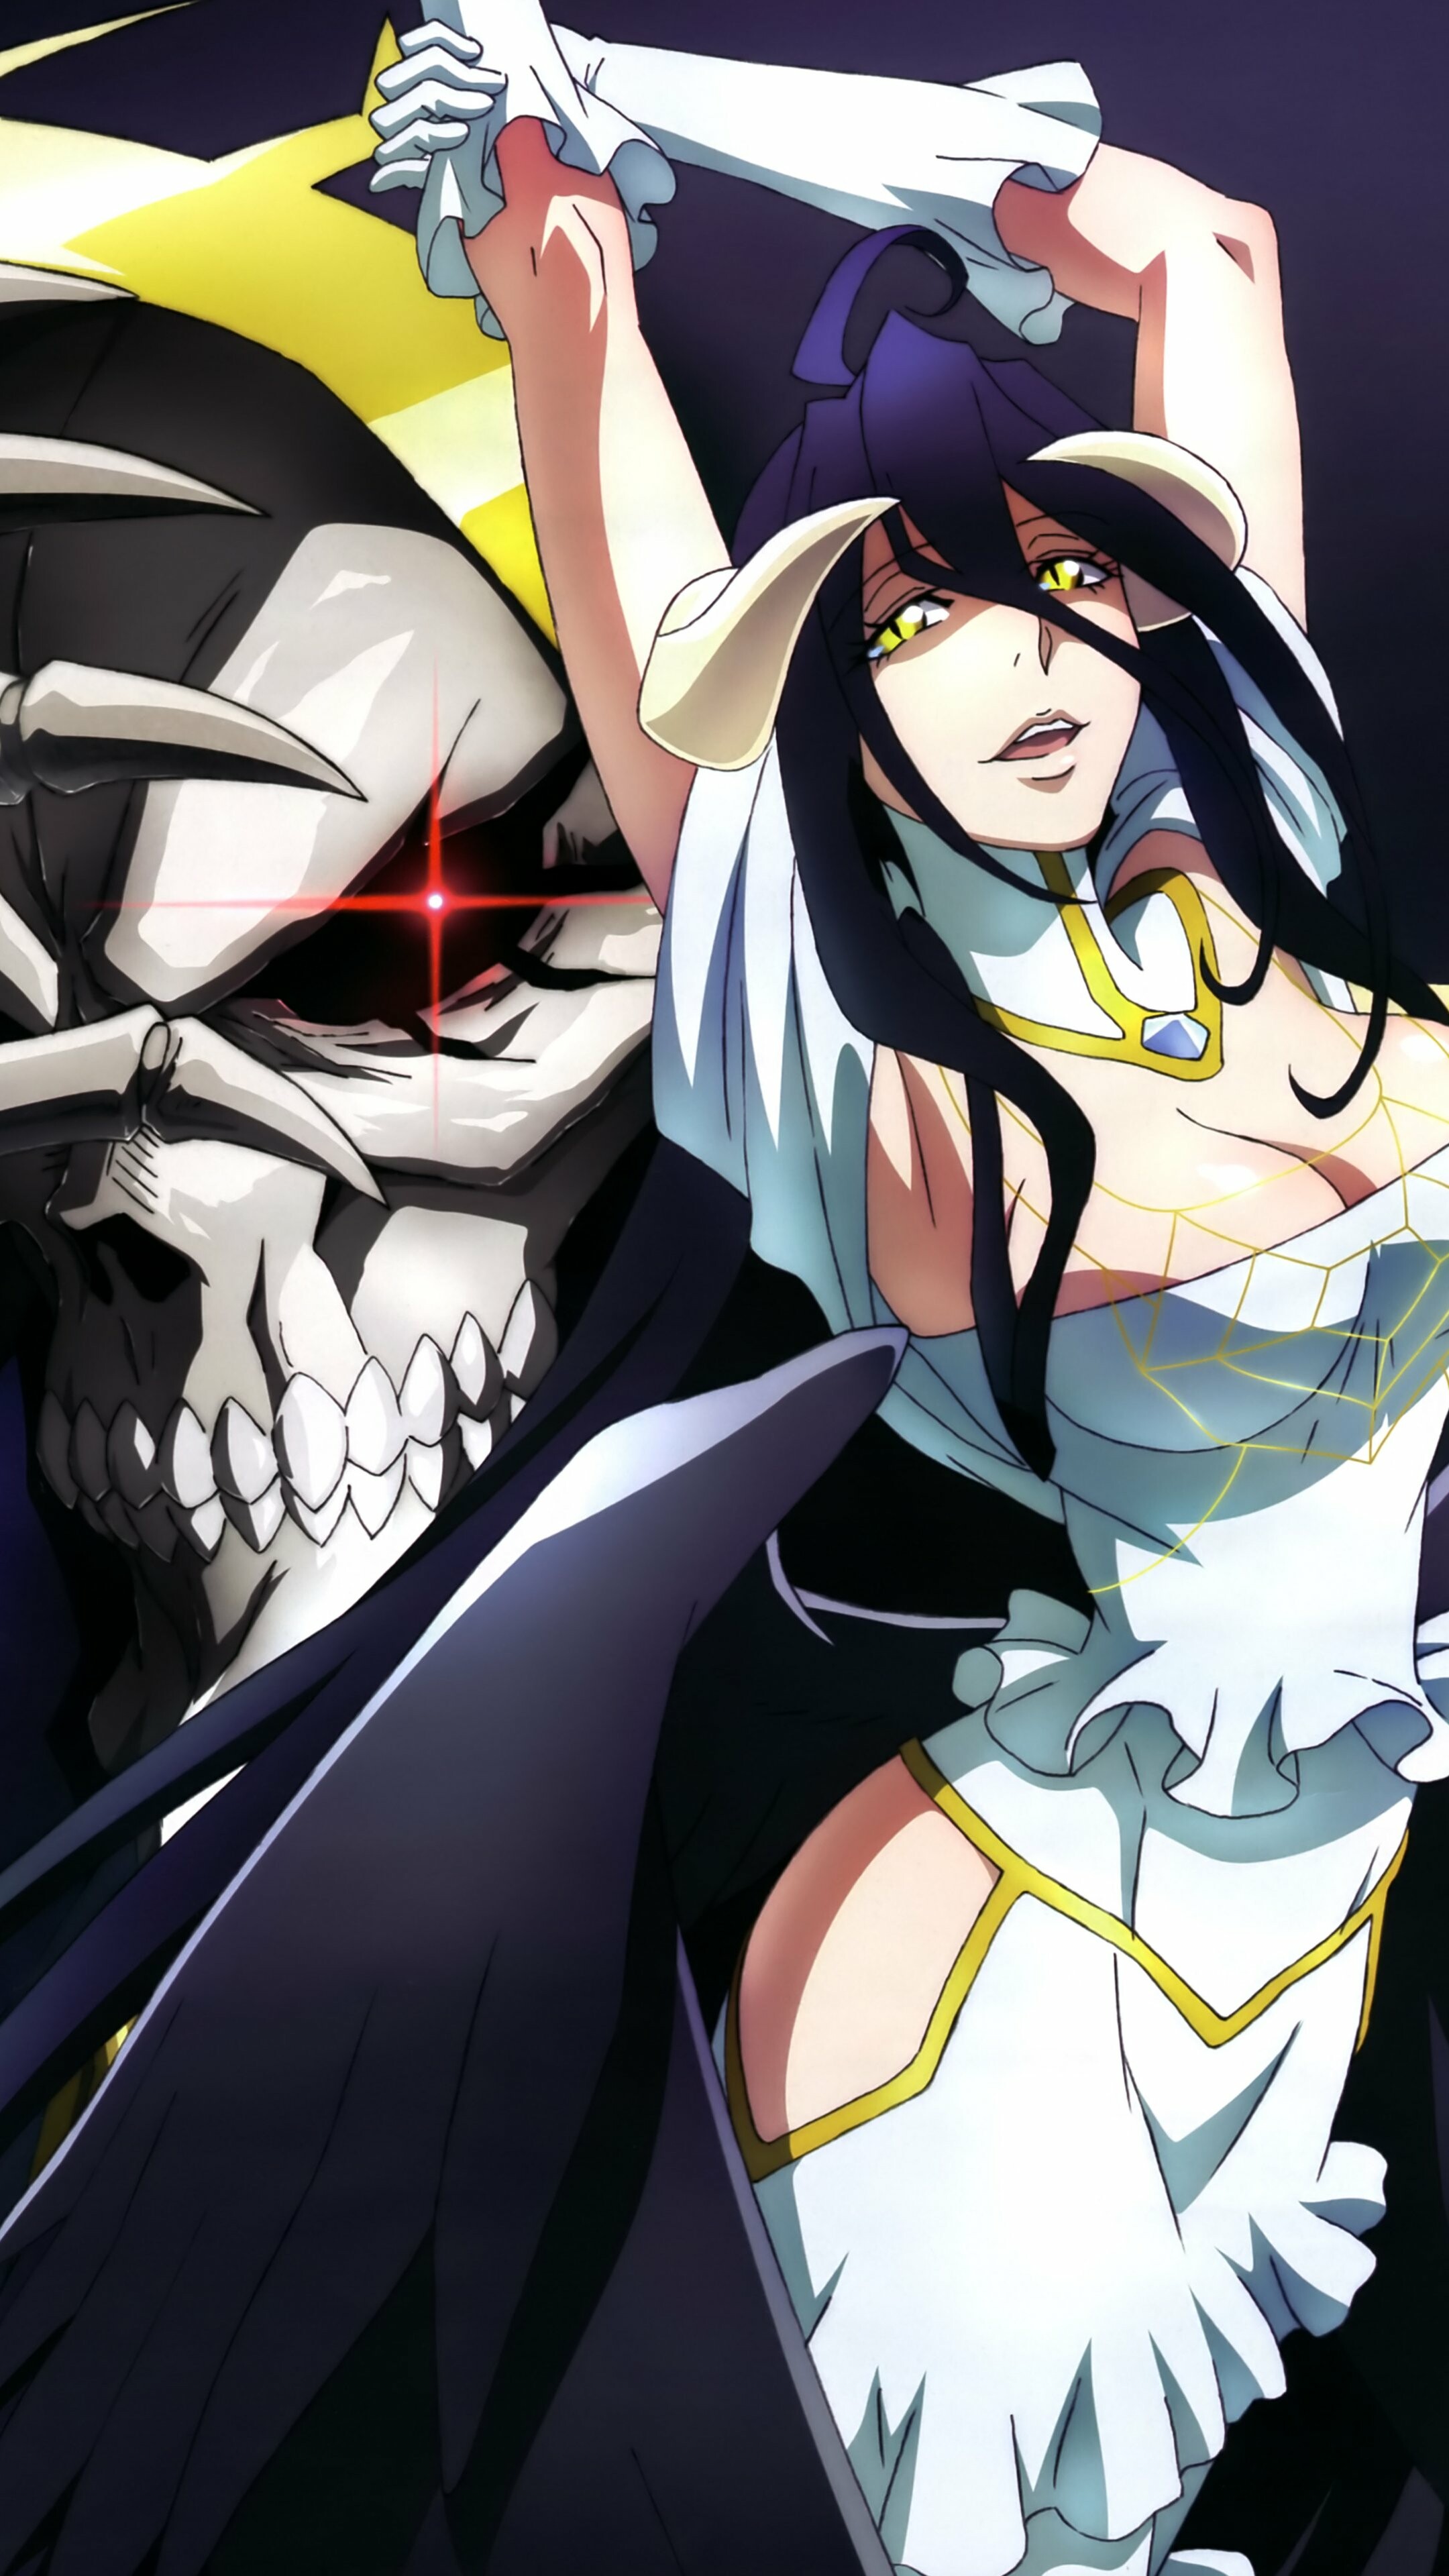 Overlord: Ainz Ooal Gown and Albedo, Aired between July 7 and September 29, 2015. 2160x3840 4K Background.